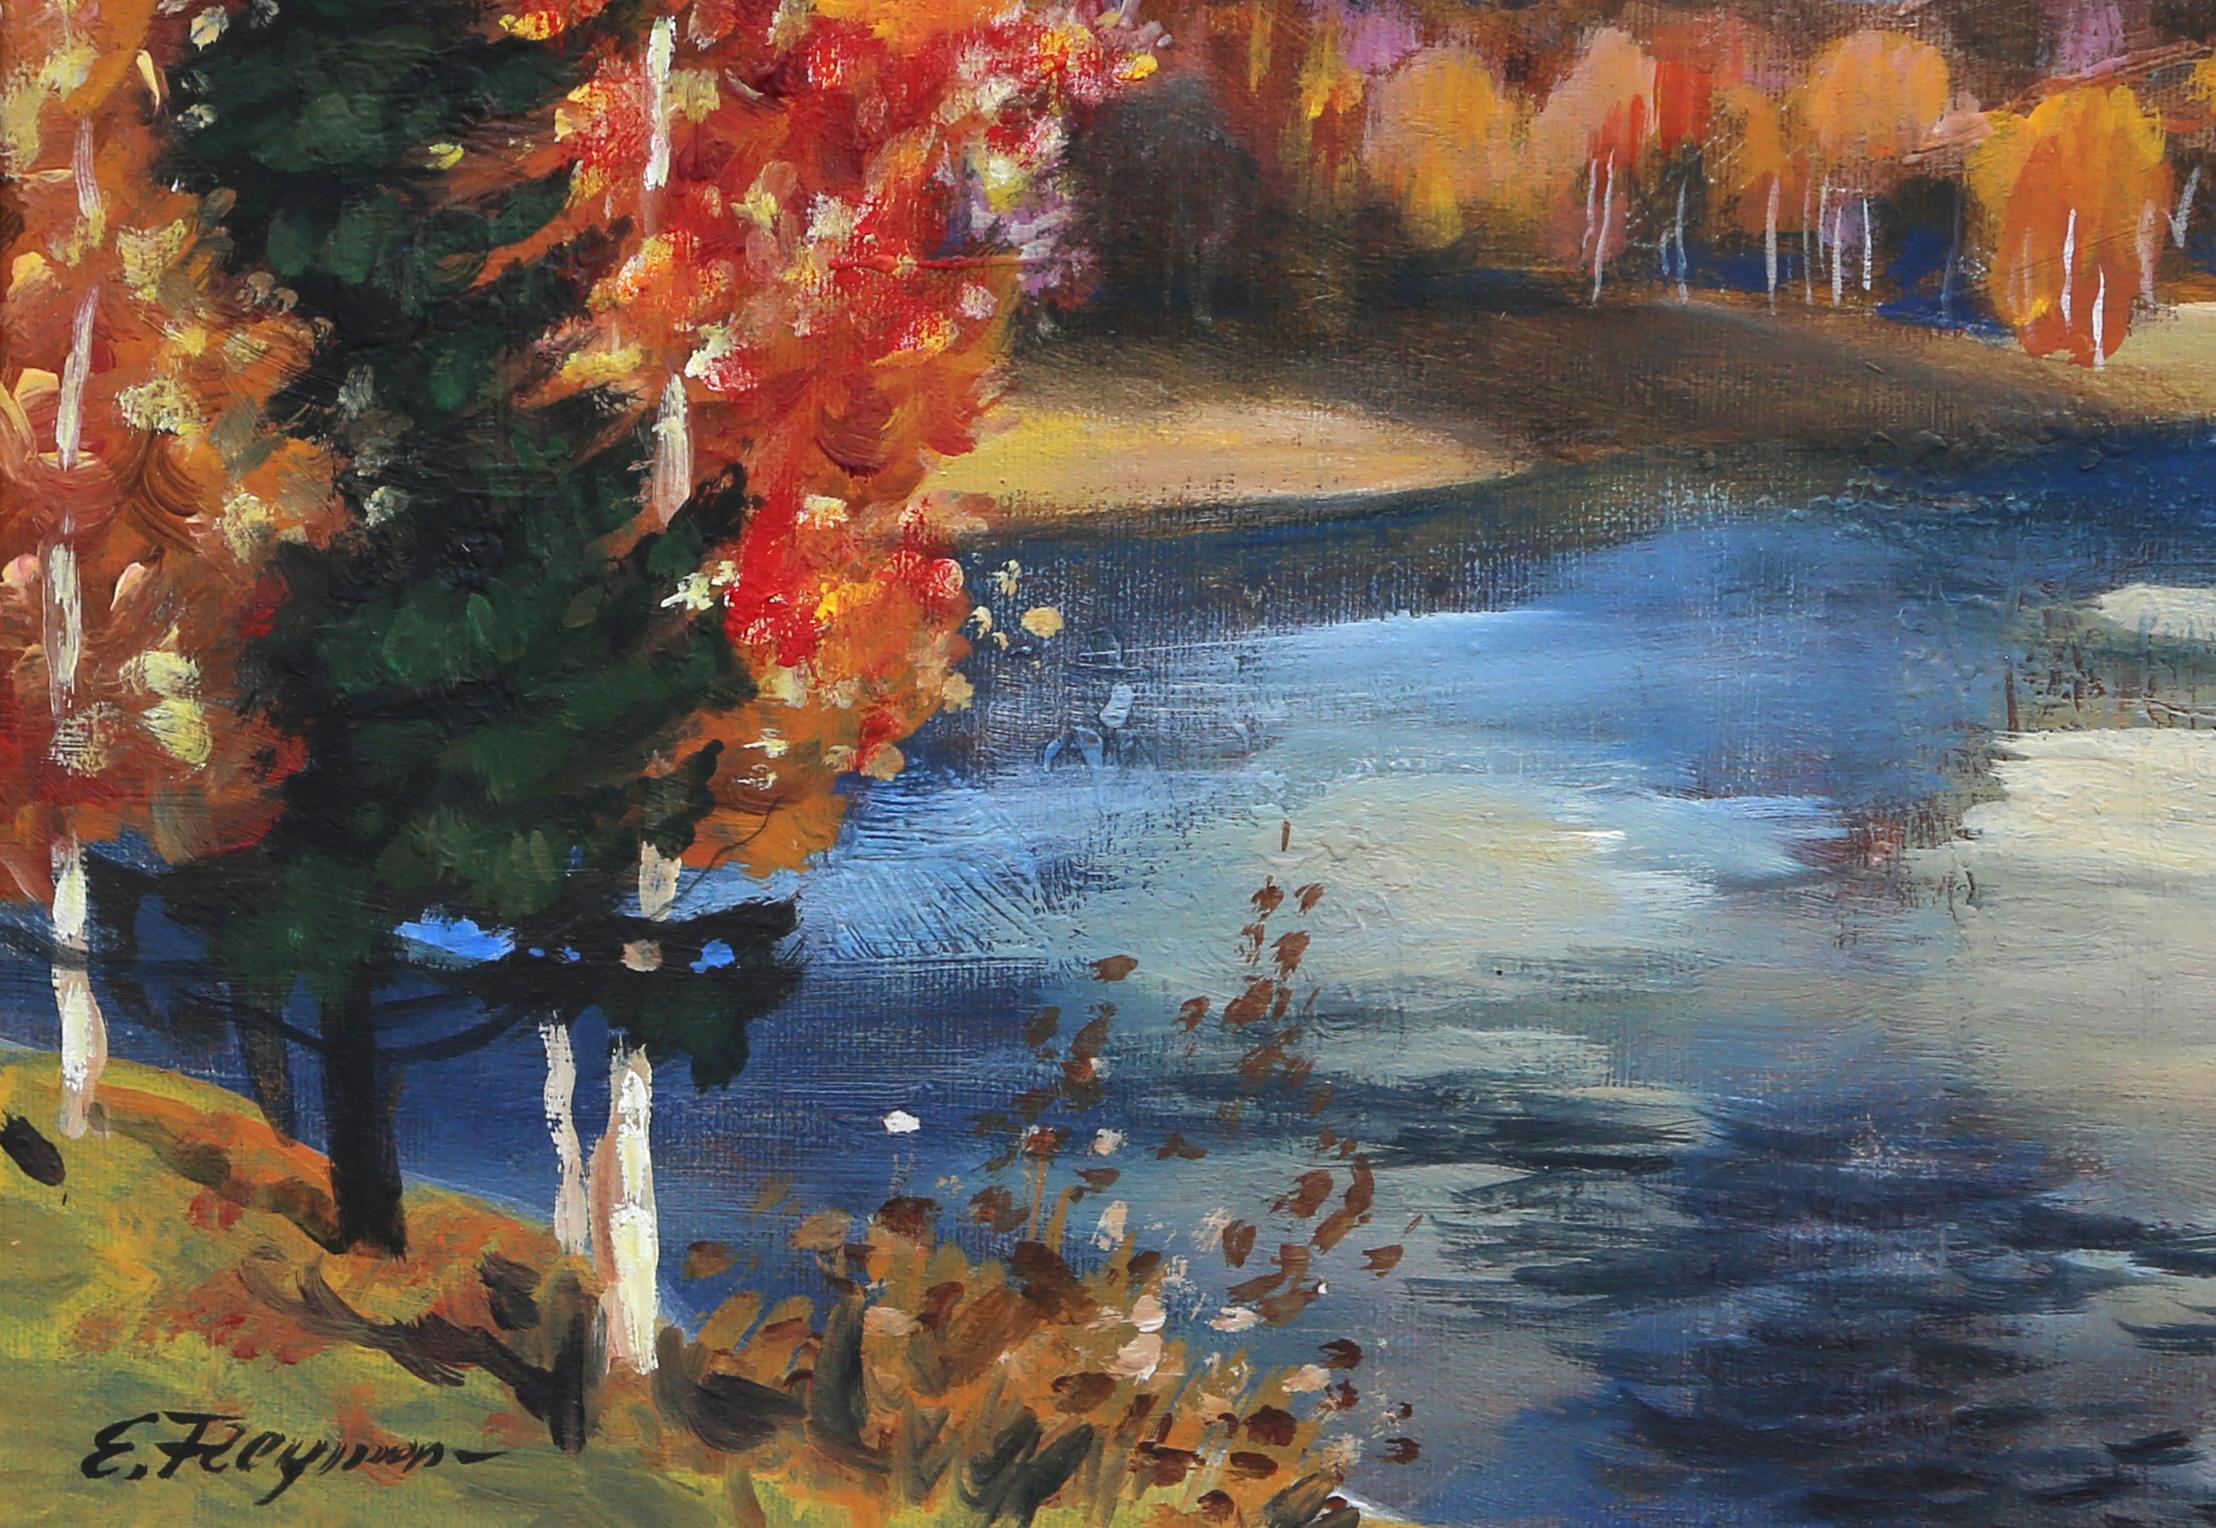 An Impressionist landscape painting of a lake and trees in Autumn by contemporary artist Erik Freyman.  Nicely framed.

Signed lower left
Canvas size: 12 x 16 inches
Frame size: 17.5 x 21.5 inches